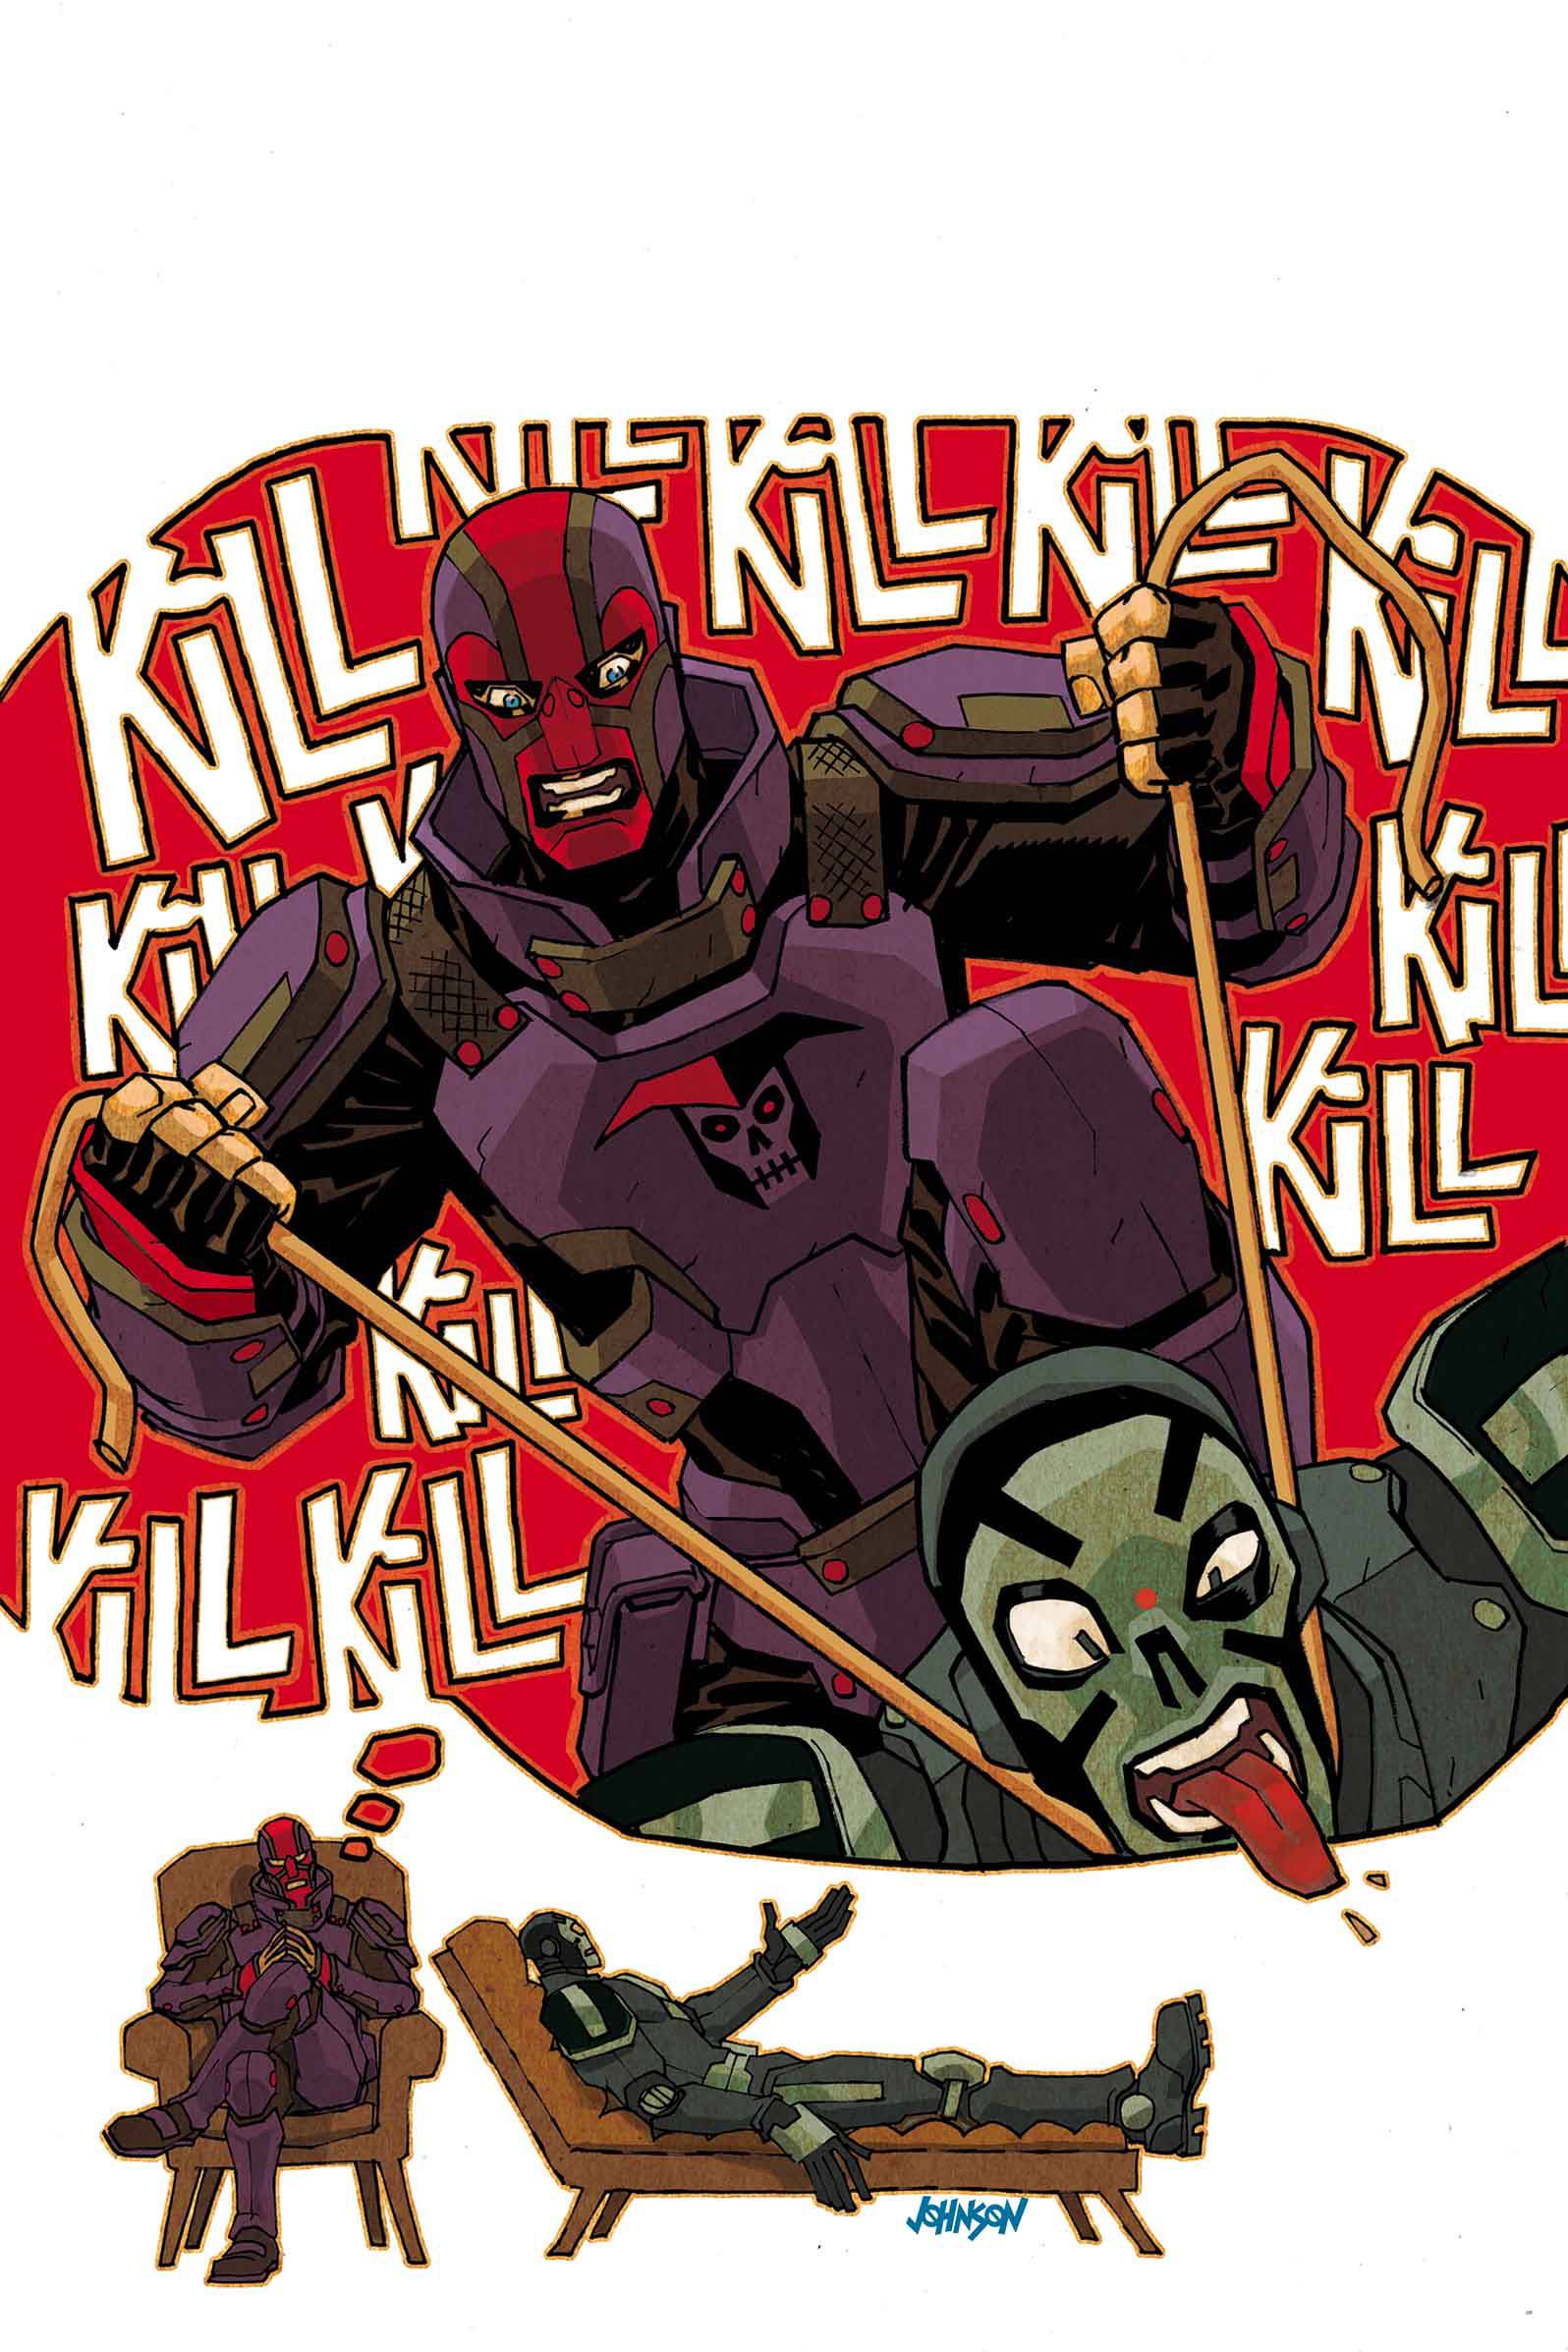 FOOLKILLER BY JOHNSON POSTER